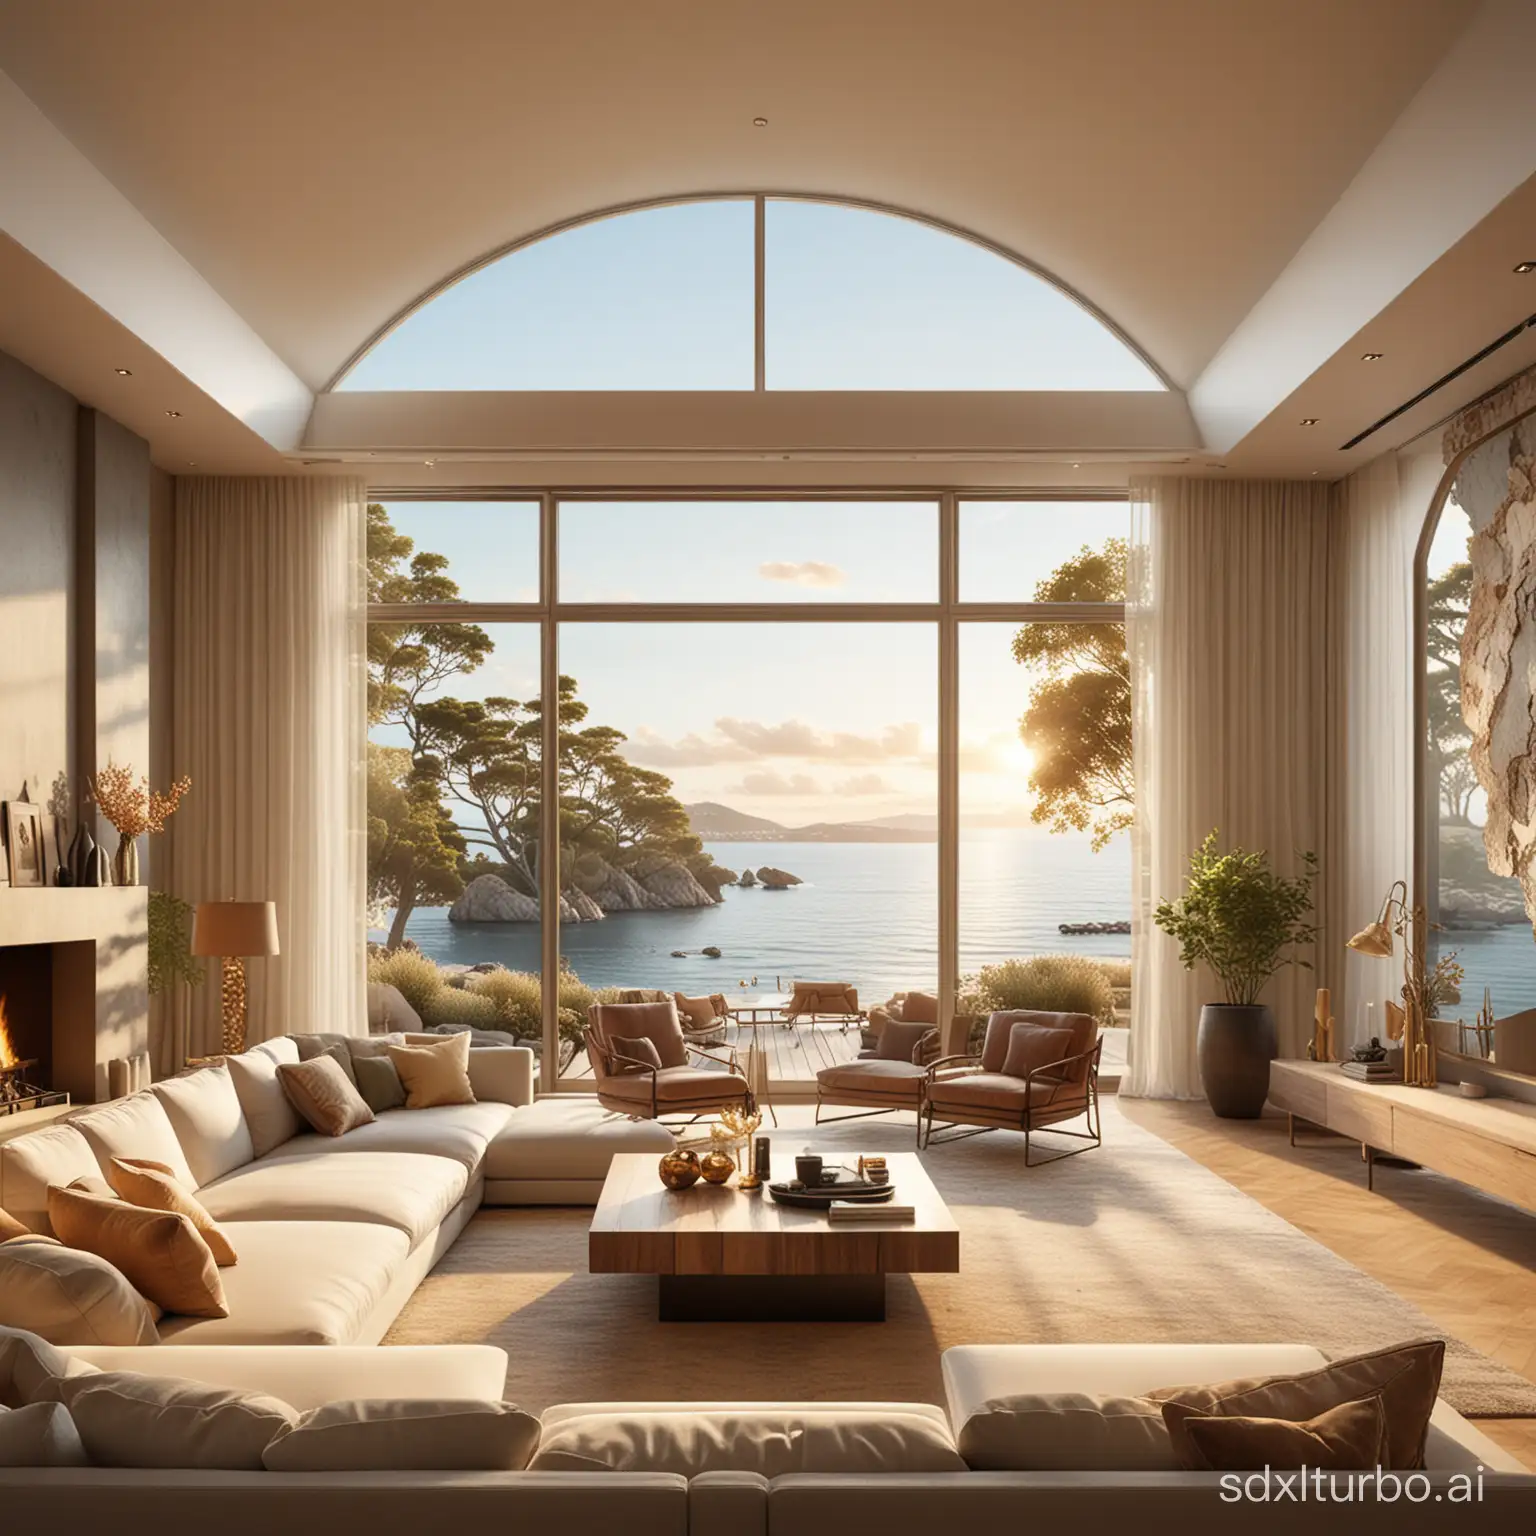 Luxurious-Living-Room-with-Bay-Window-Overlooking-Tranquil-Waters